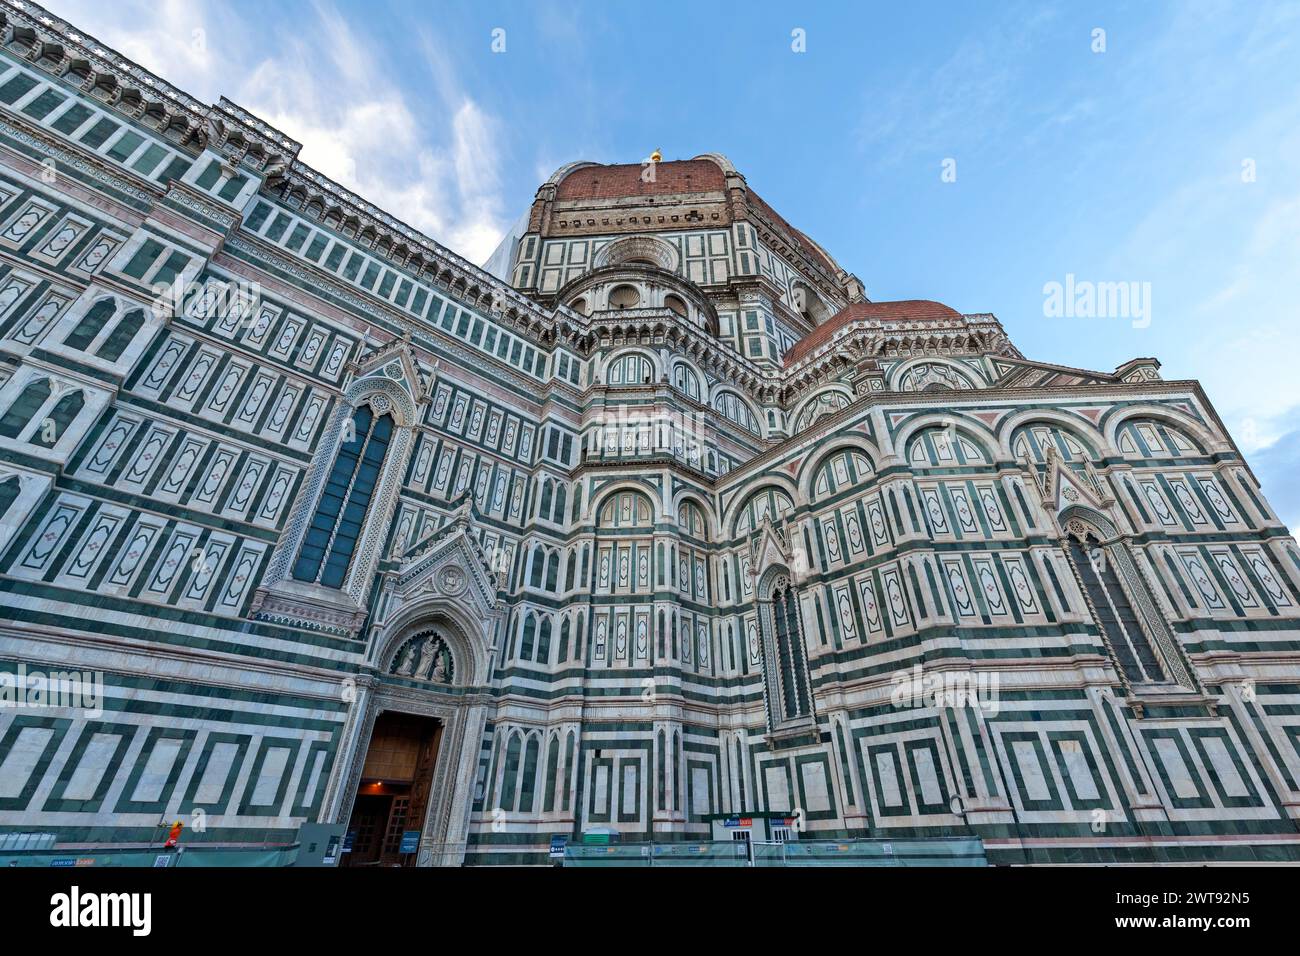 The famous Duomo (Cathedral) of Florence, Italy, a masterpiece of gothic style, completed in 1436, with beautiful decoration and the magnificent dome Stock Photo